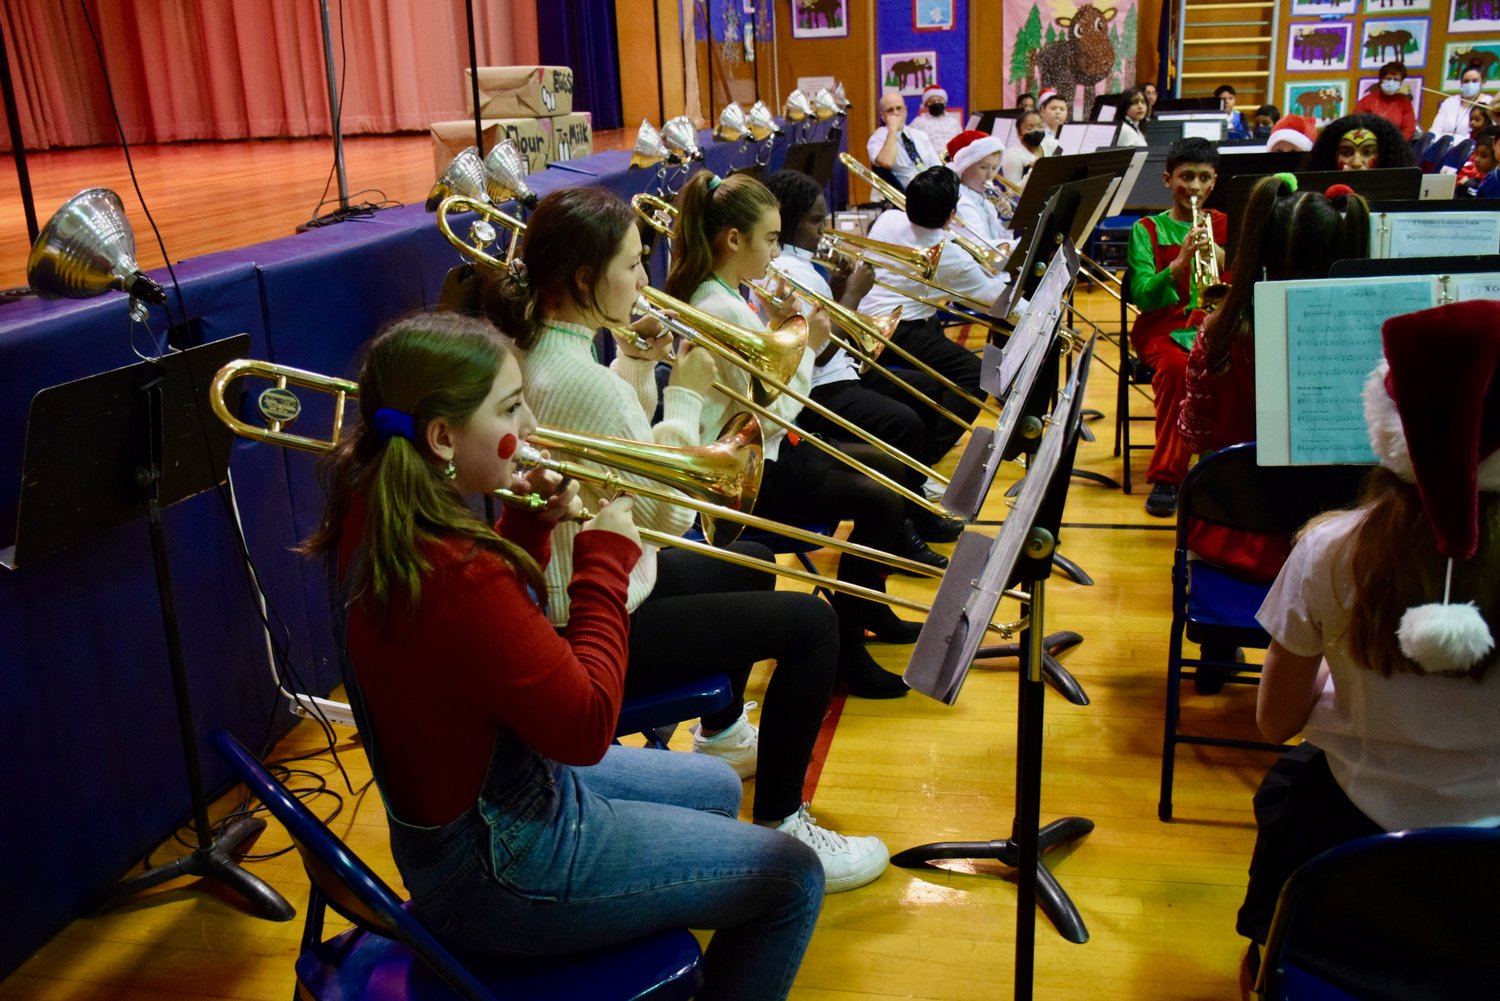 Stewart Manor School’s band performed during the morning show on Dec. 15.